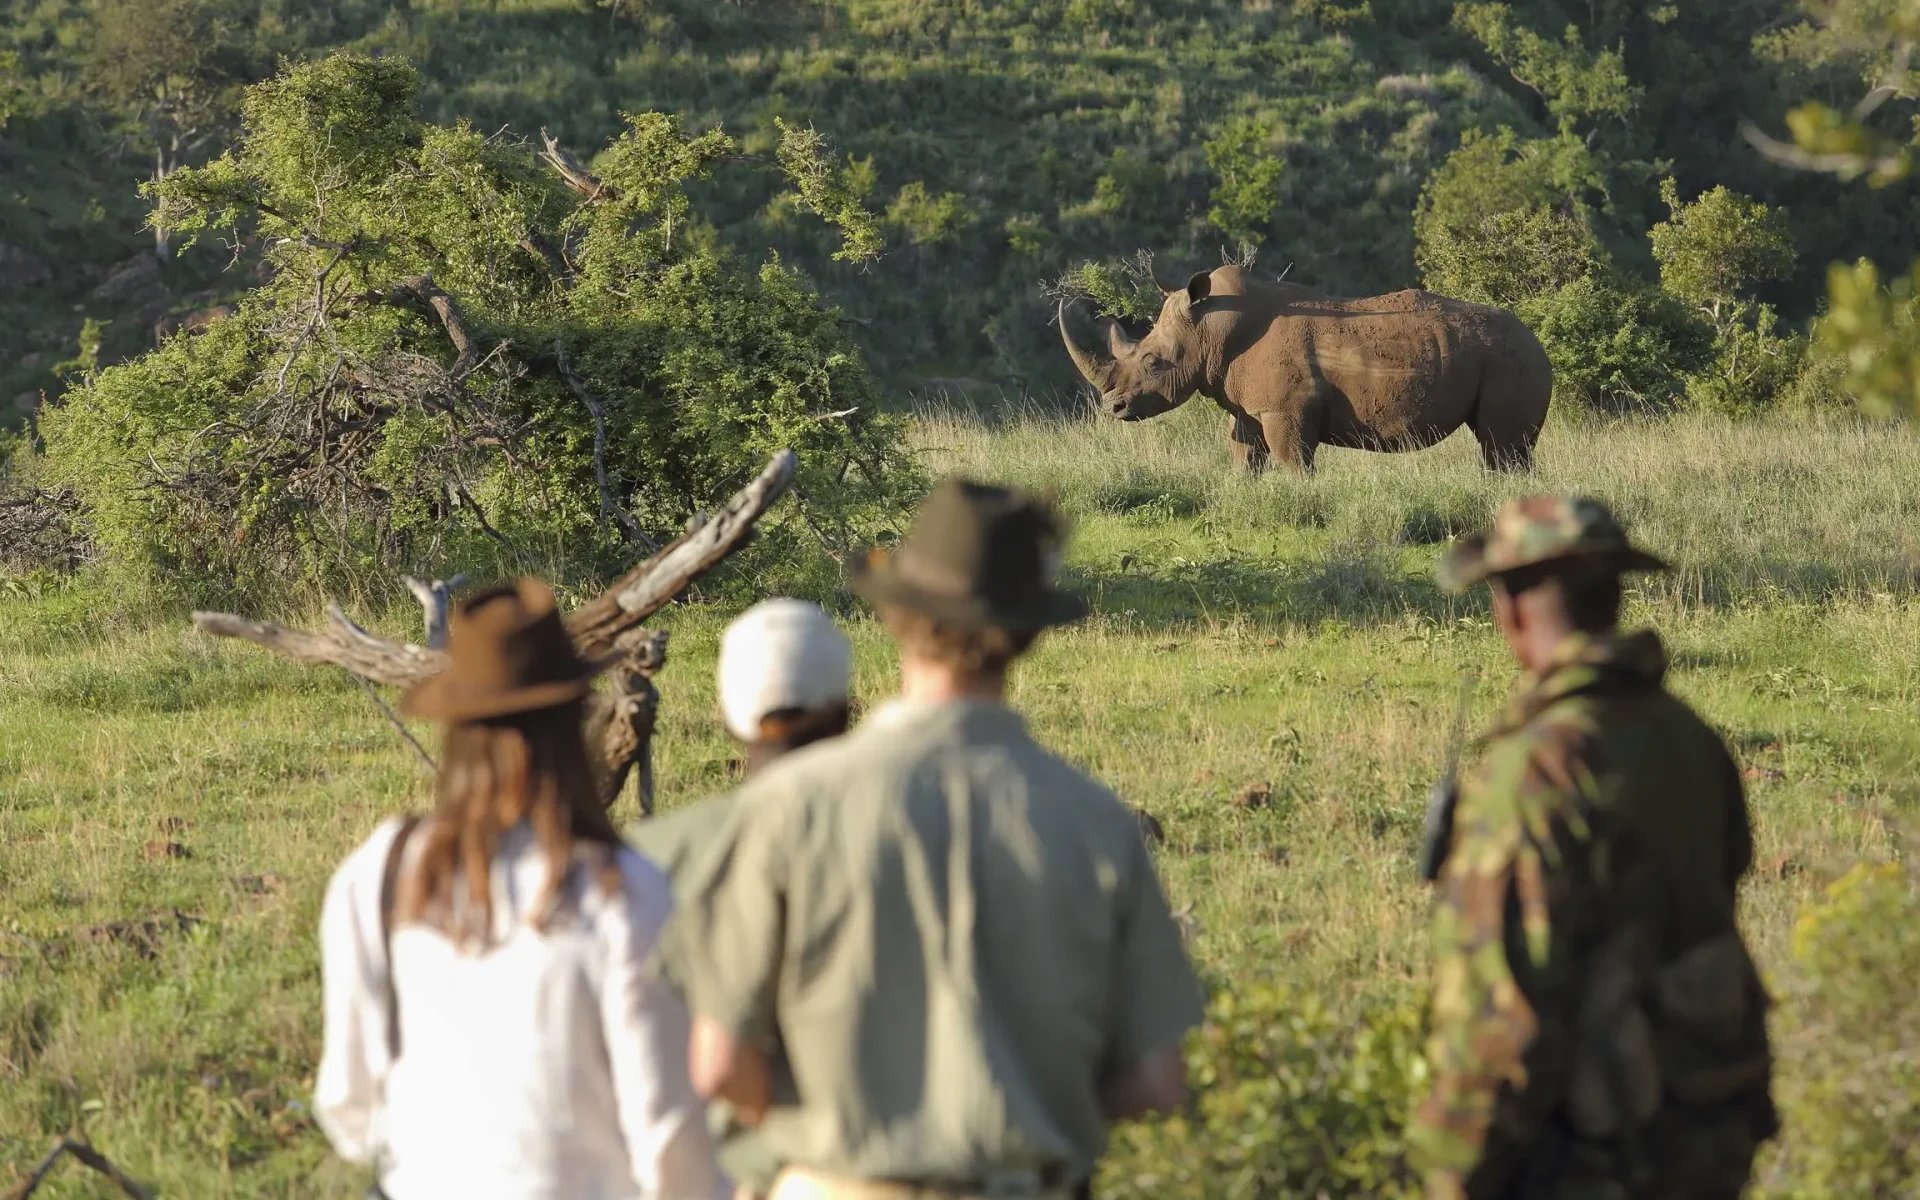 Some guests accompany a local guide on a bush walk, they gaze at a rhinoceros in the bush.